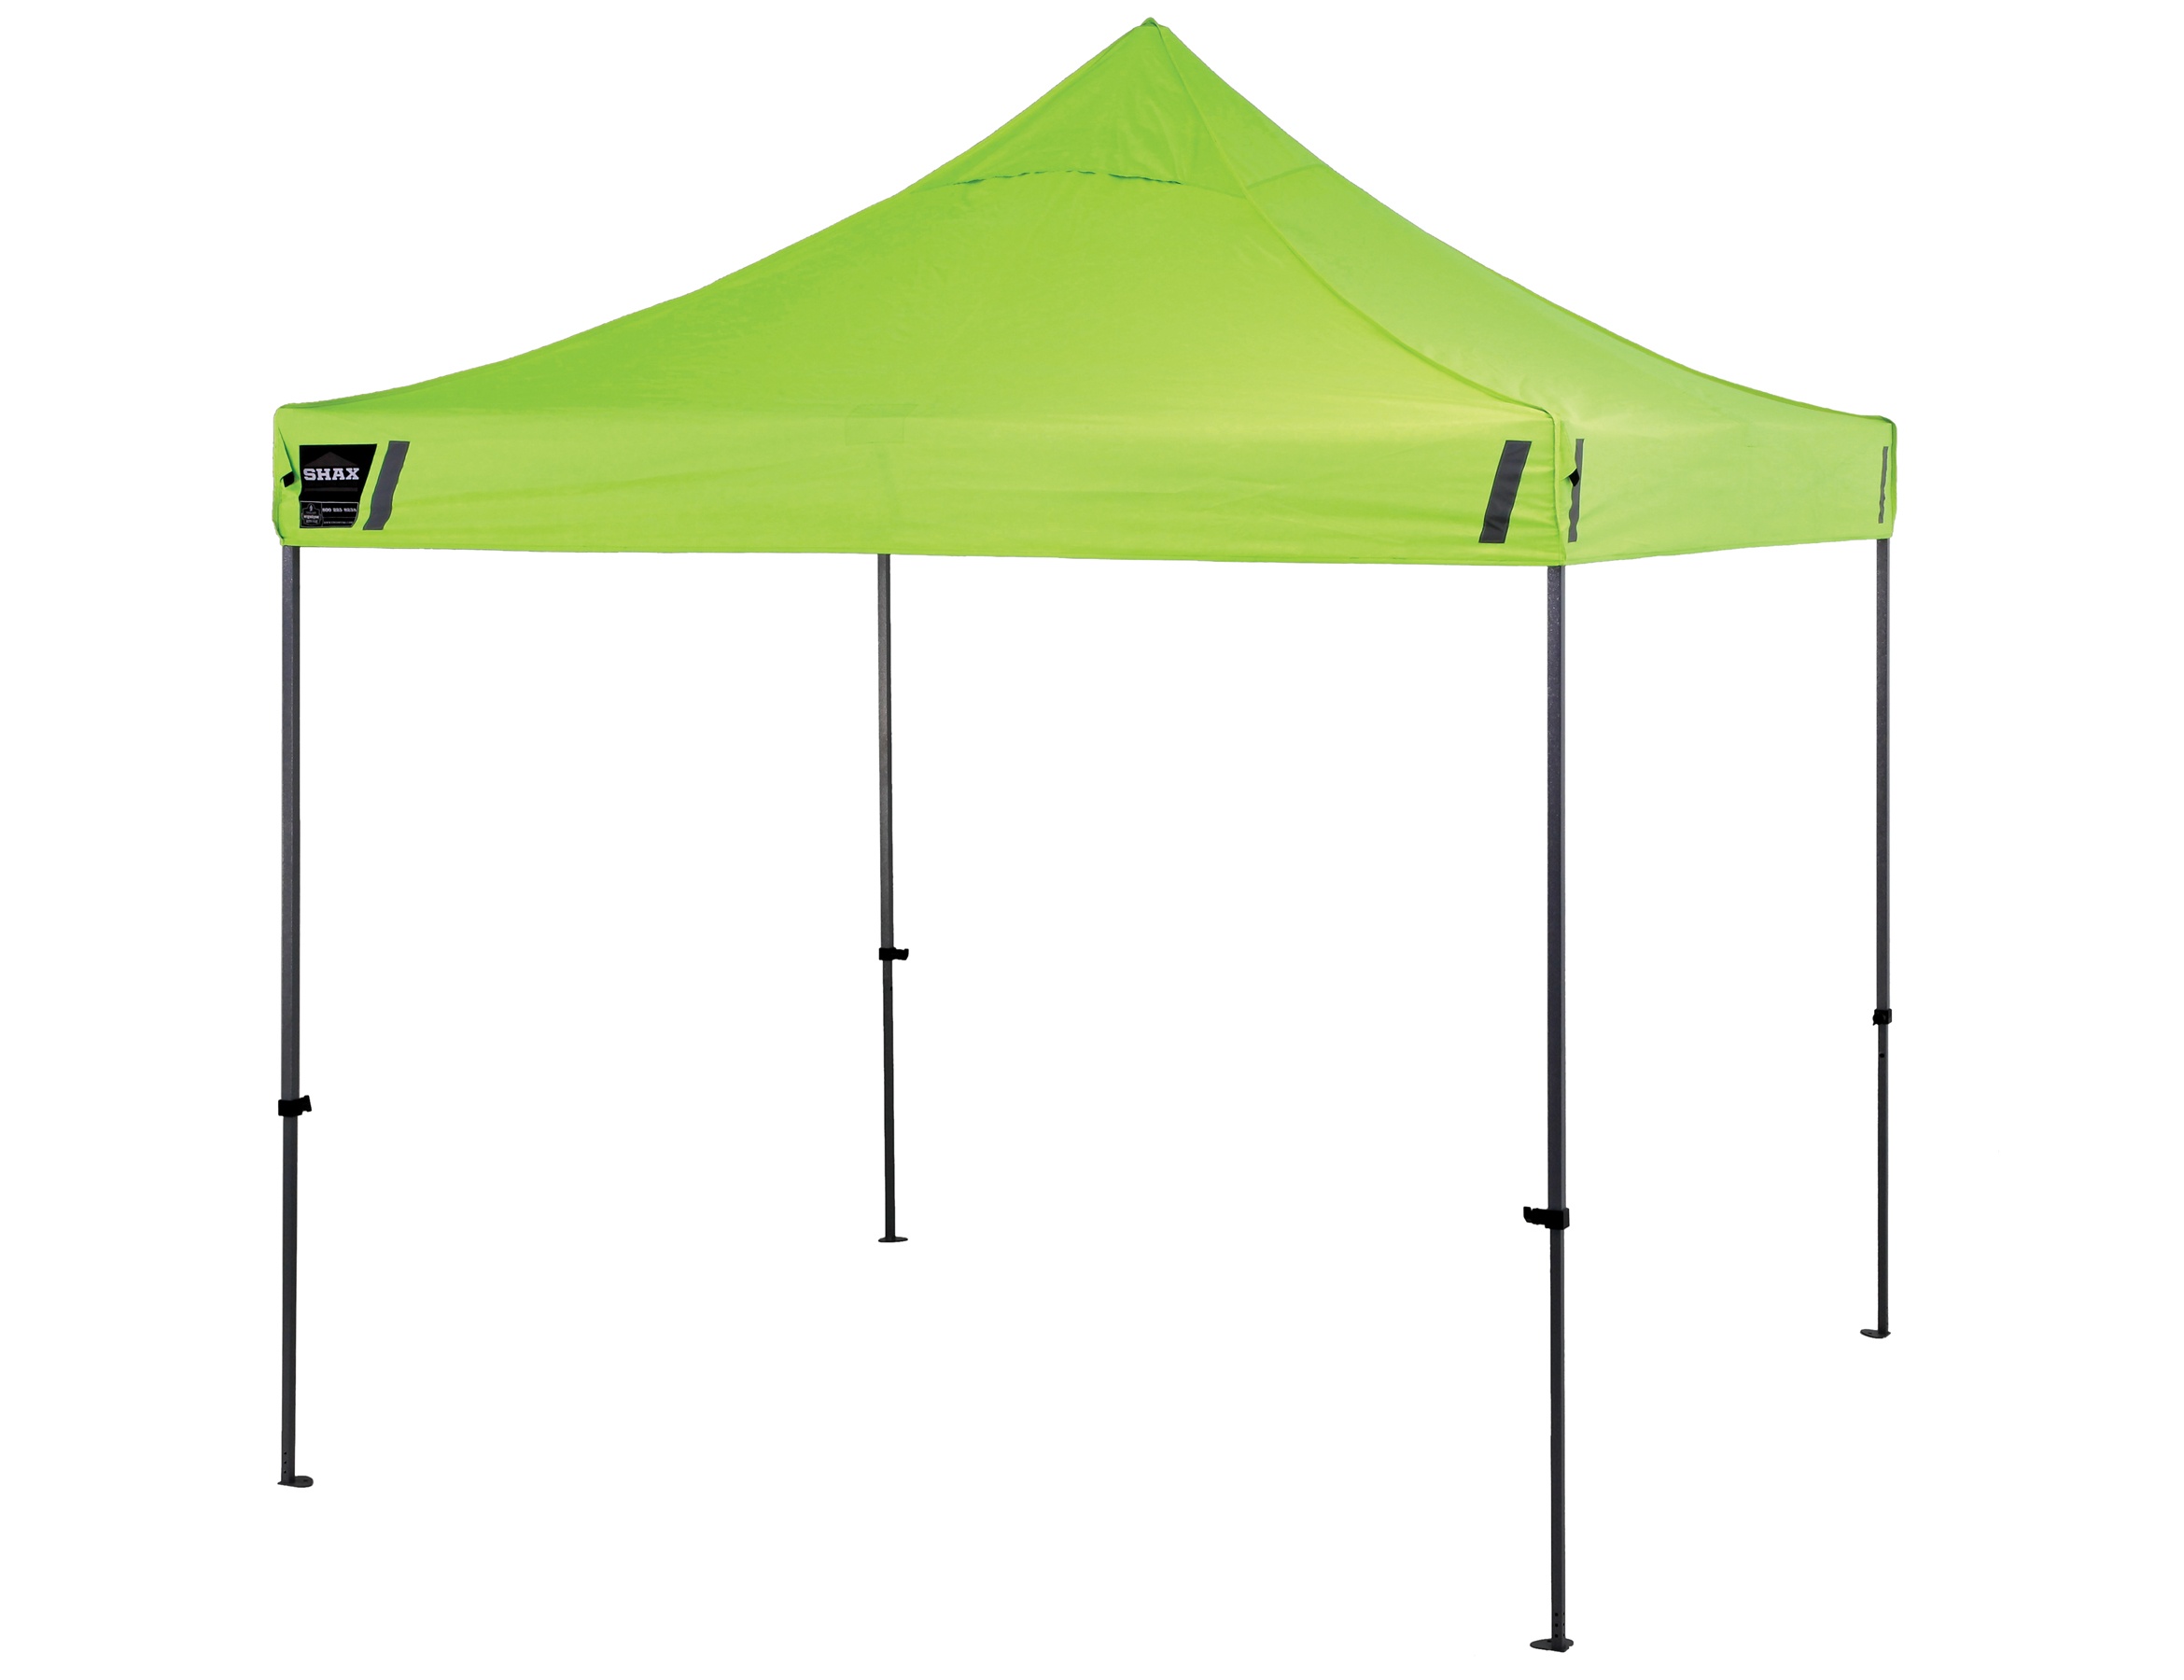 Ergodyne 6000 Shax Heavy-Duty Commercial Pop-Up Tent from GME Supply